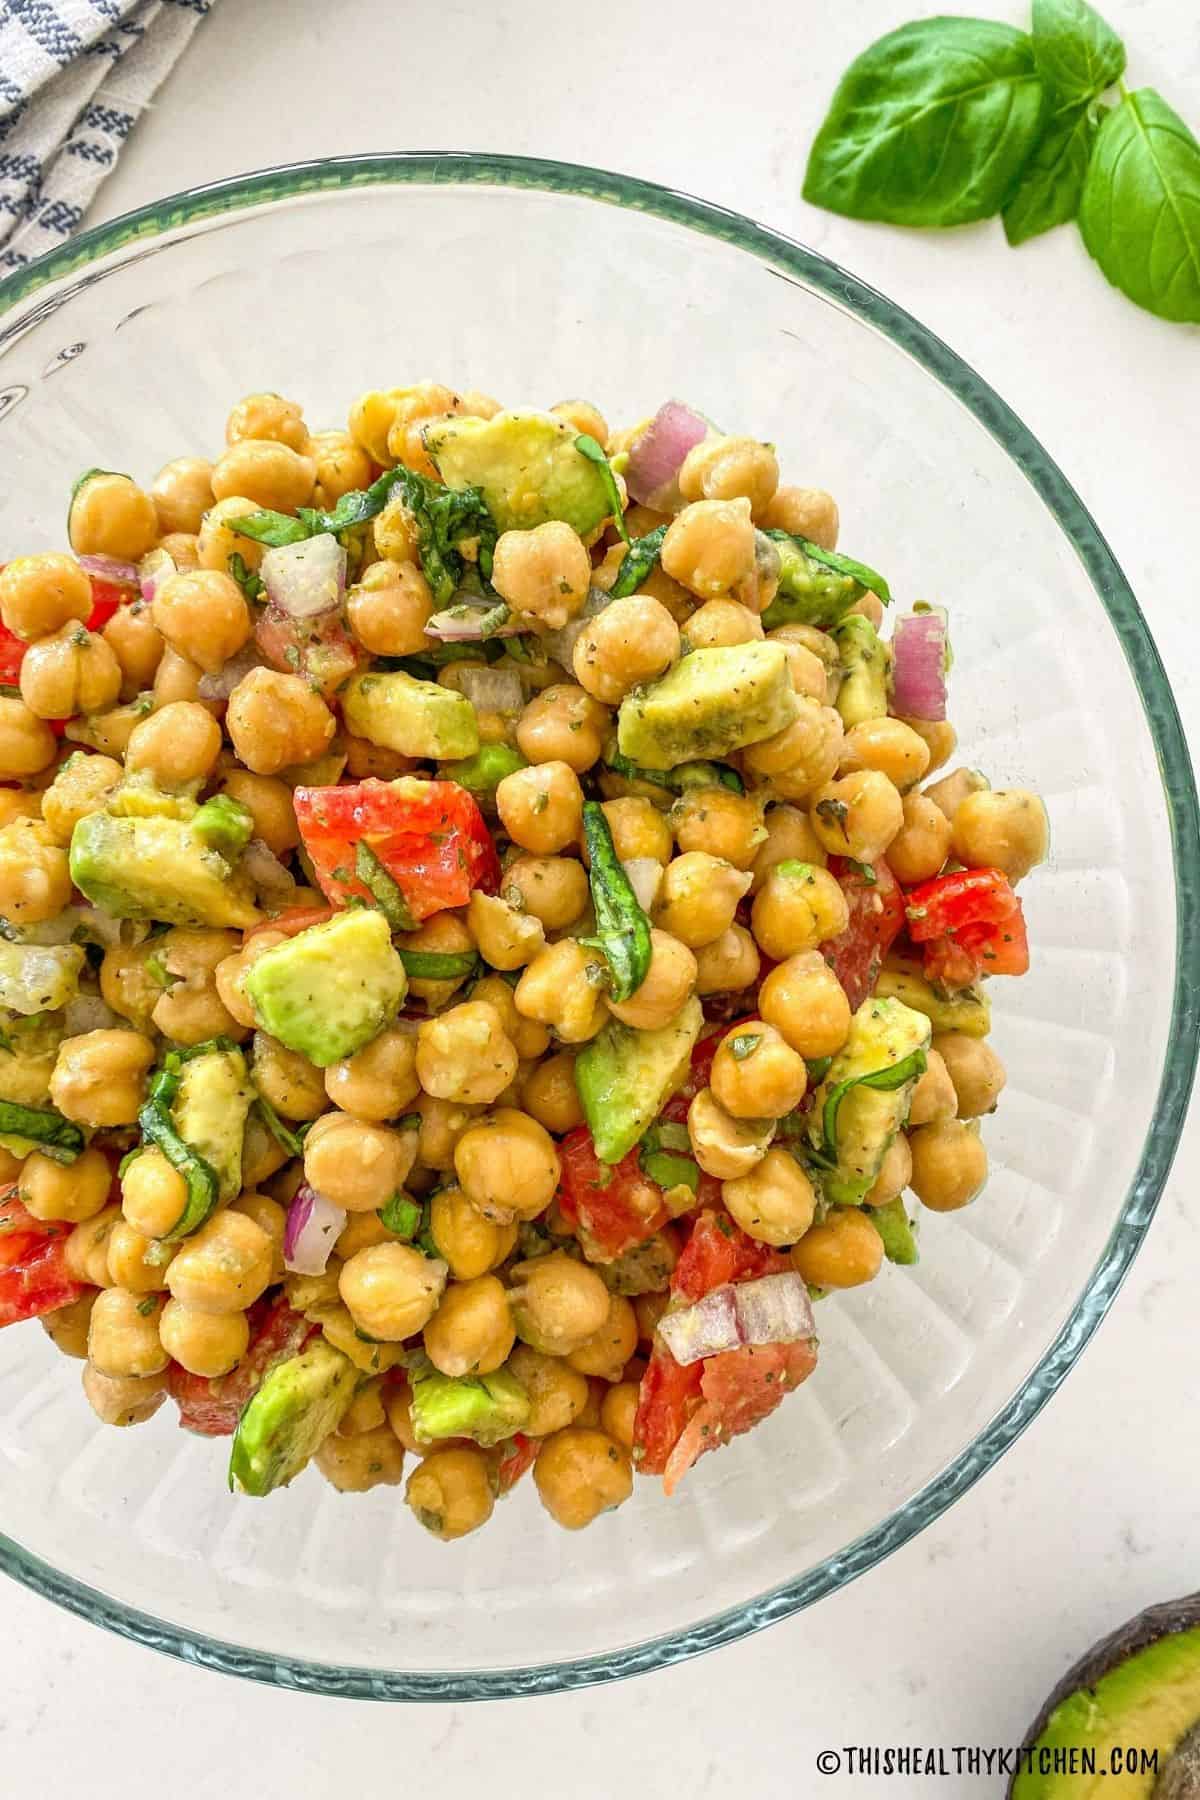 Chickpea salad in large glass mixing bowl.